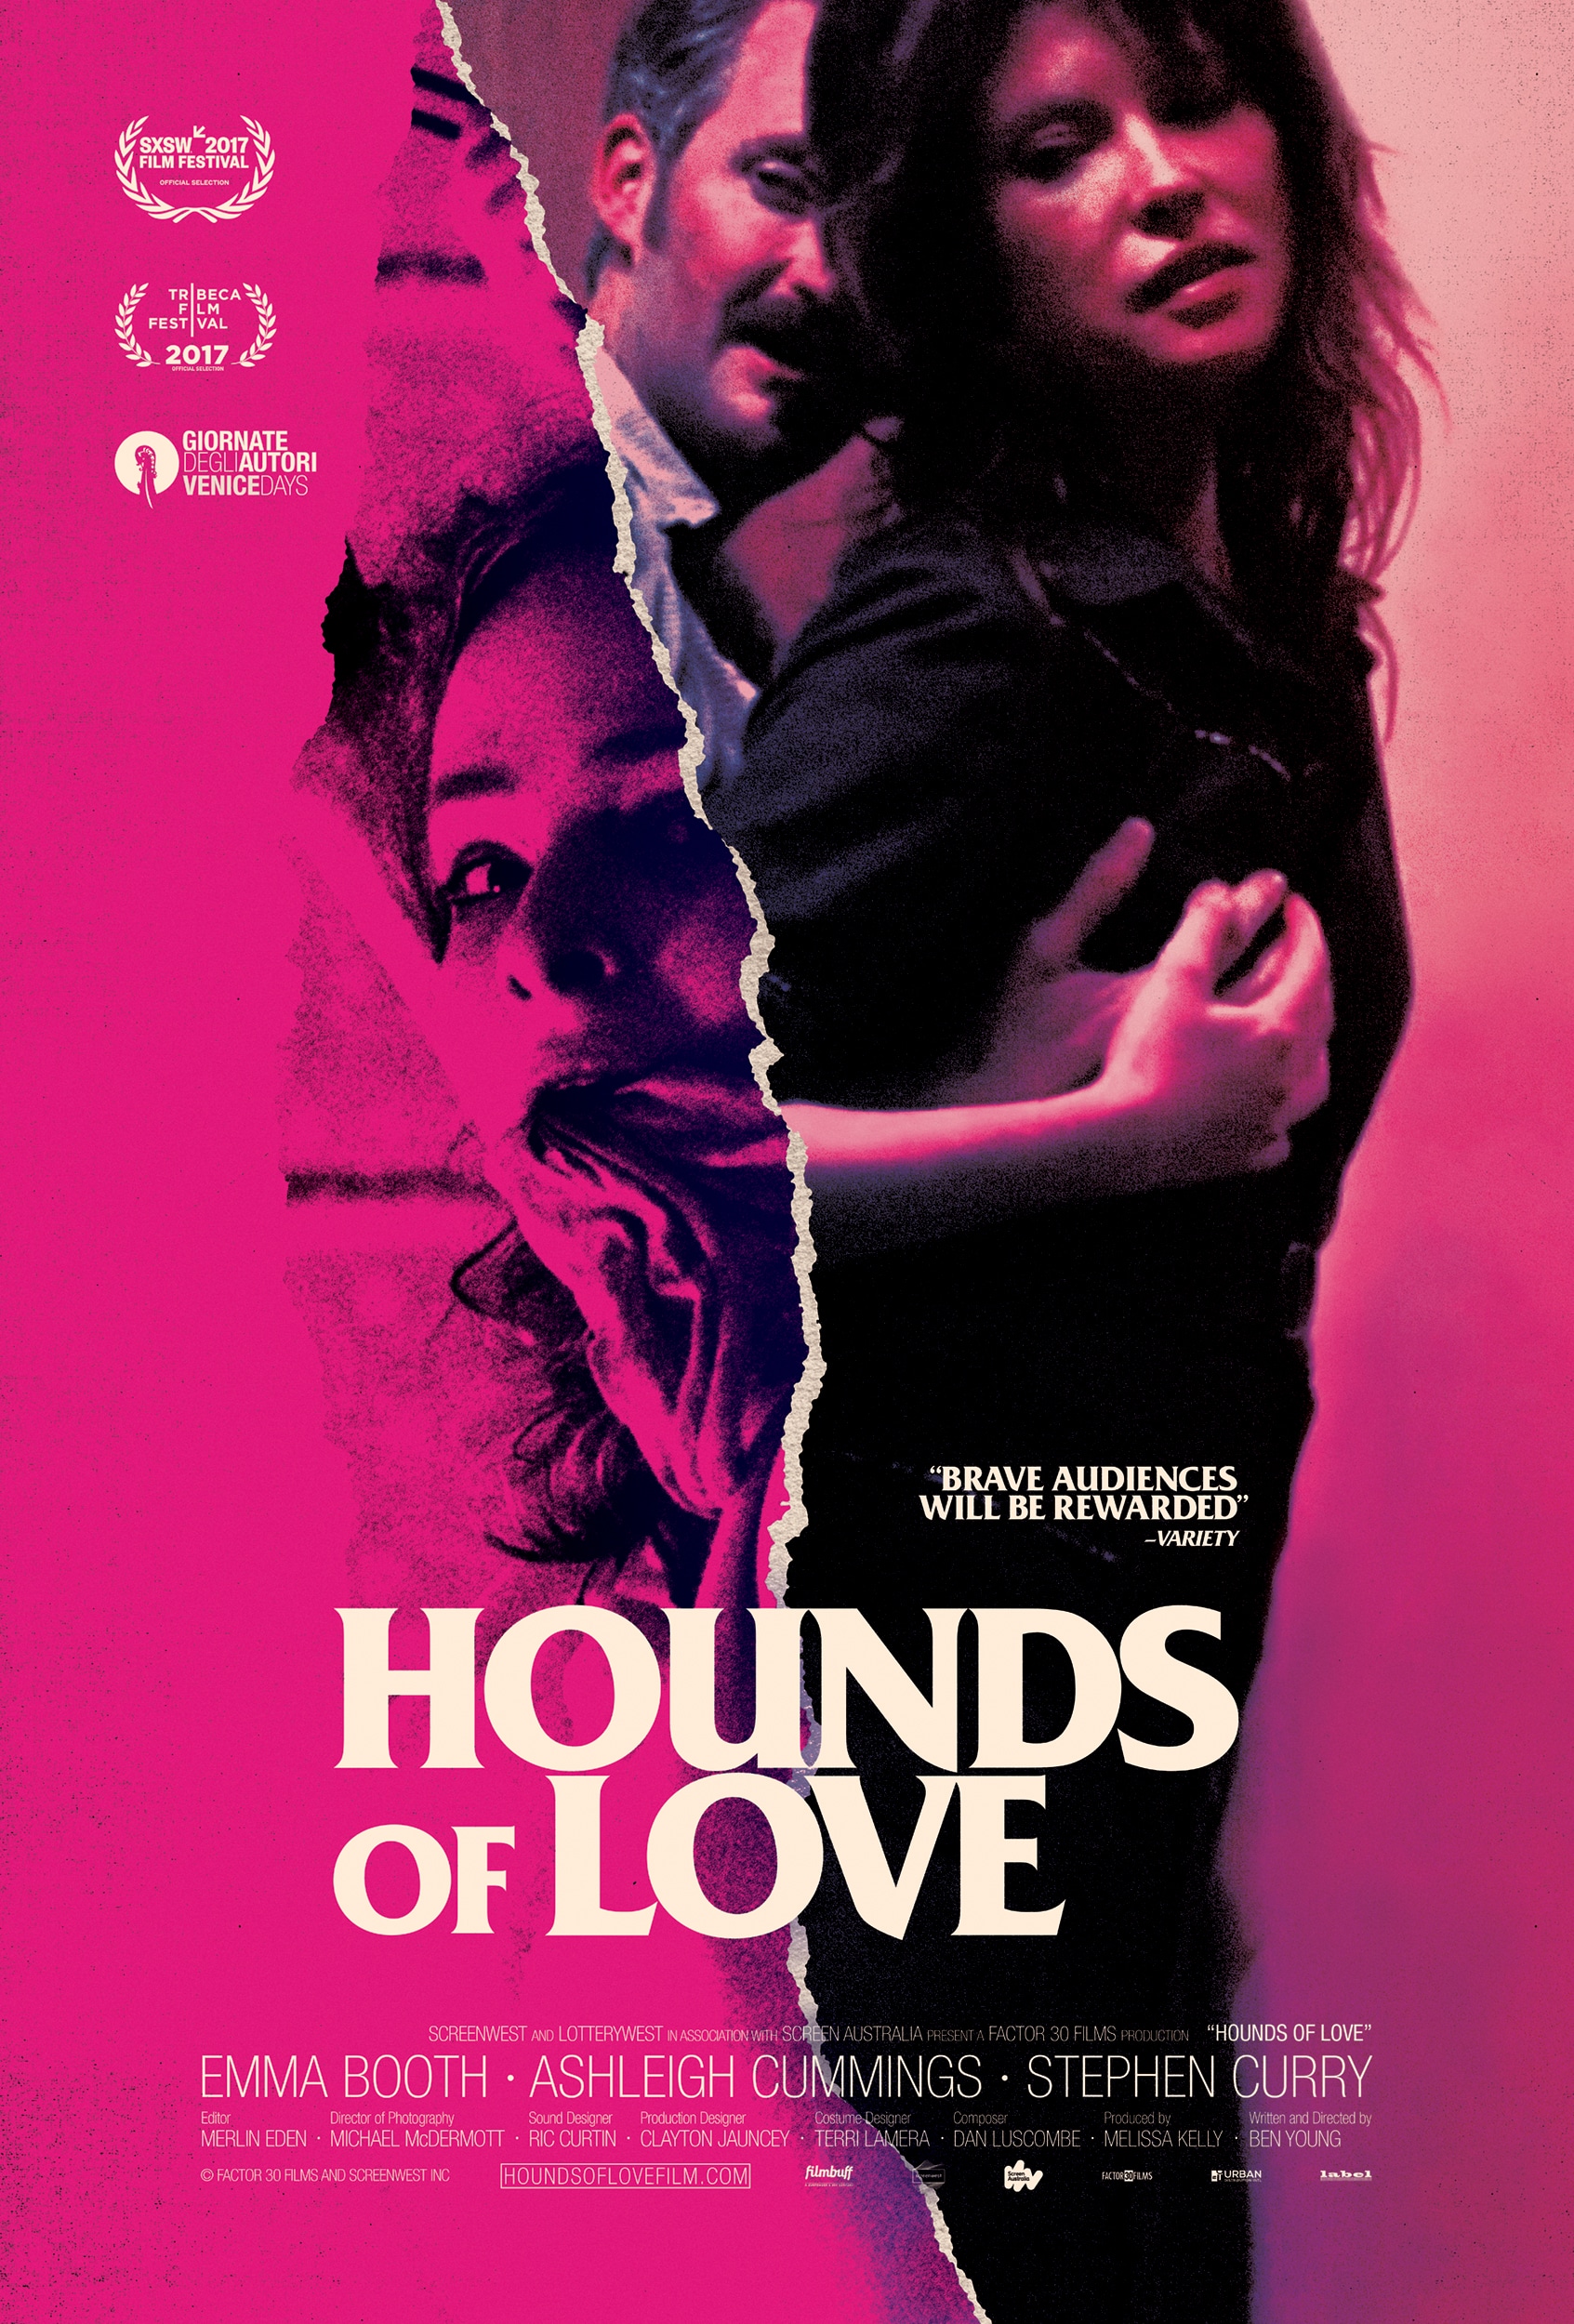 Contest: Hounds of Love Run of Engagement